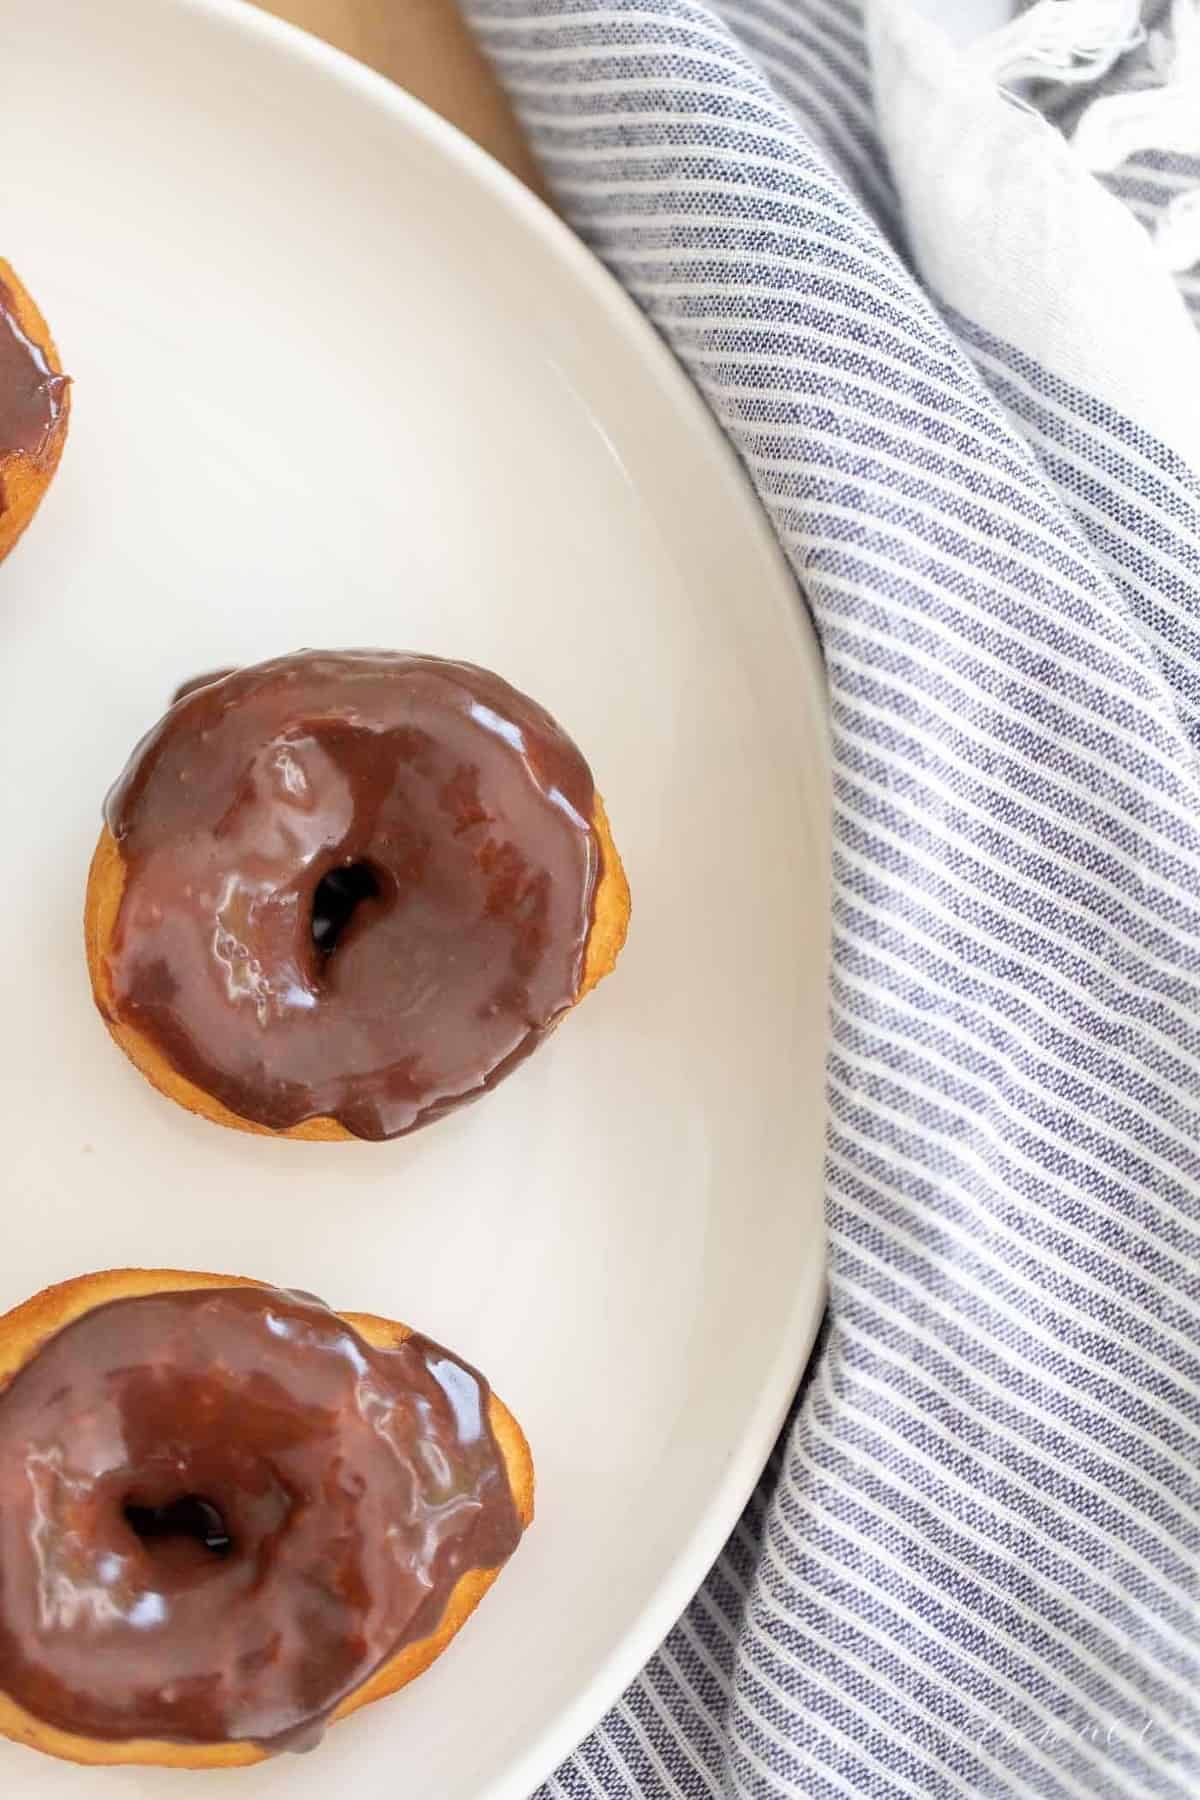 Biscuit donuts covered in chocolate icing on a white plate.